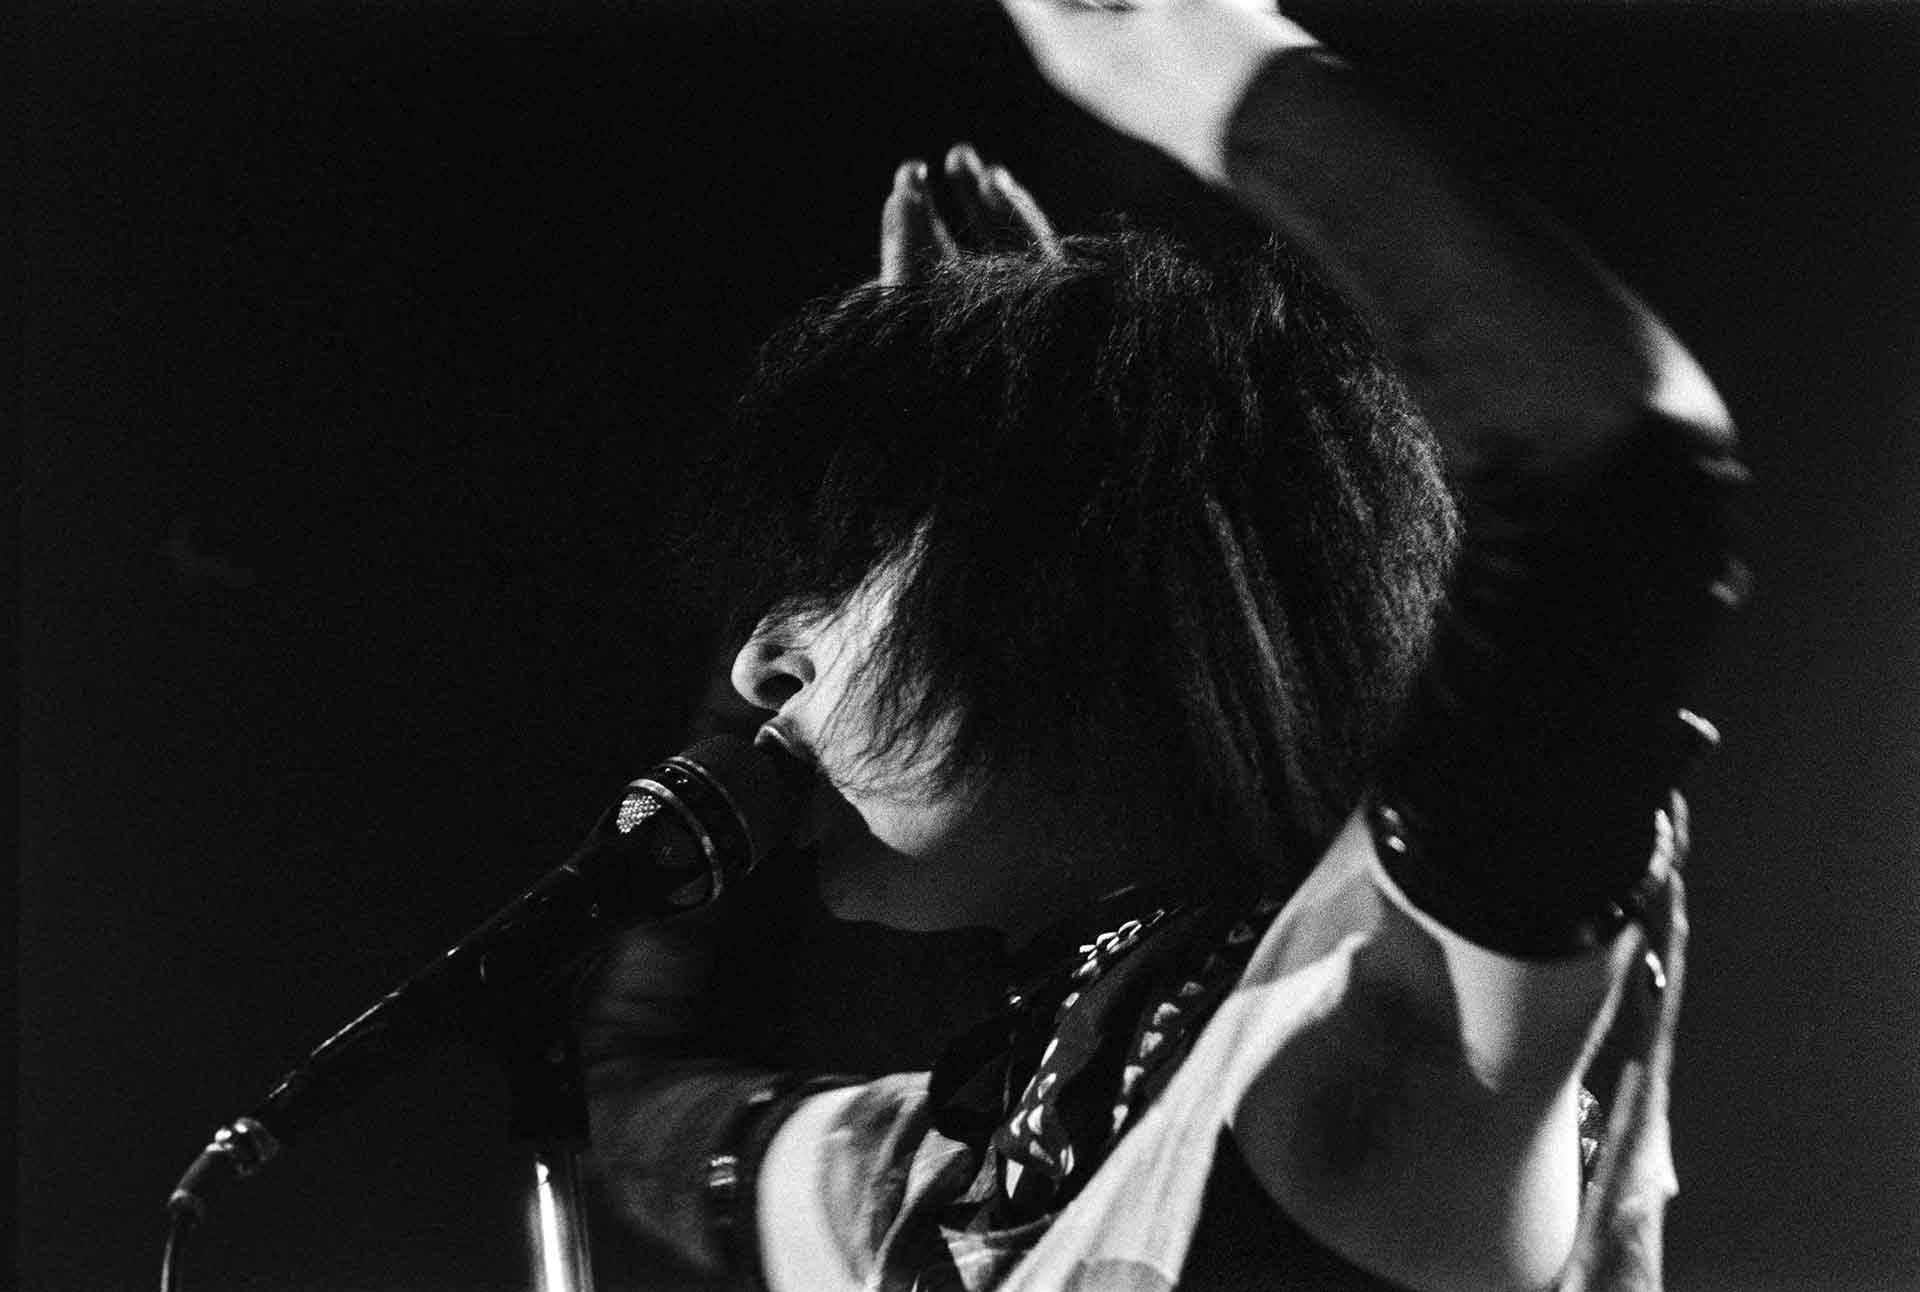 Live photos of experimental New Wave, Noise, Post-Punk, Industrial en Avantgarde bands inge-bekkers-photography-siouxsie-and-the-banshees-pandora-music-box-1983-live-alternative-bands-0342-fotografie